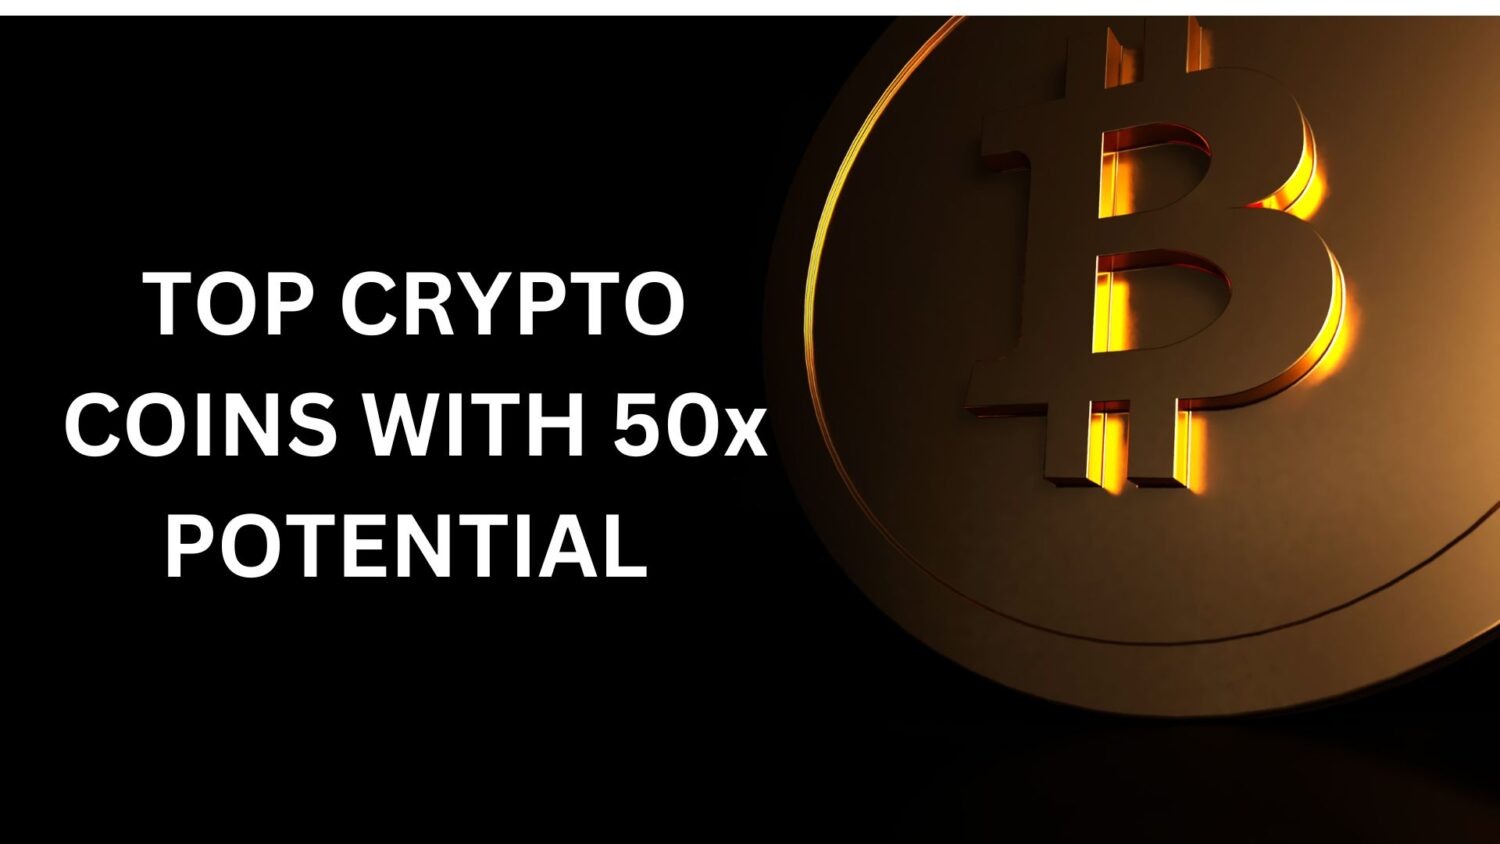 Top Crypto Coins With 50X Potential